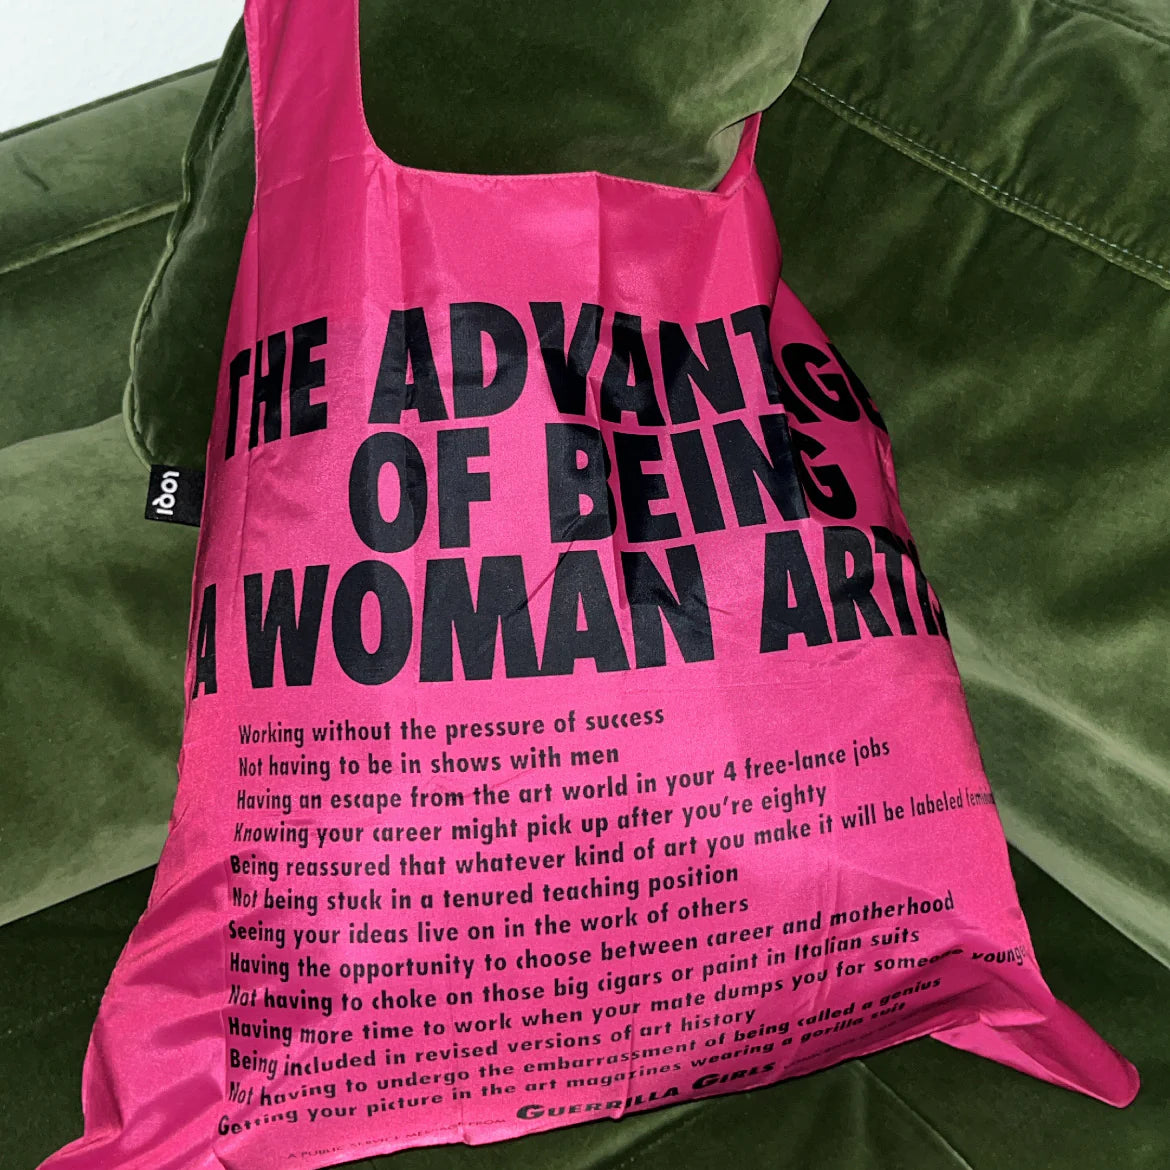 Sustainable Living Loqi Guerrilla Girls Artist Recycled Bag by Weirs of Baggot Street